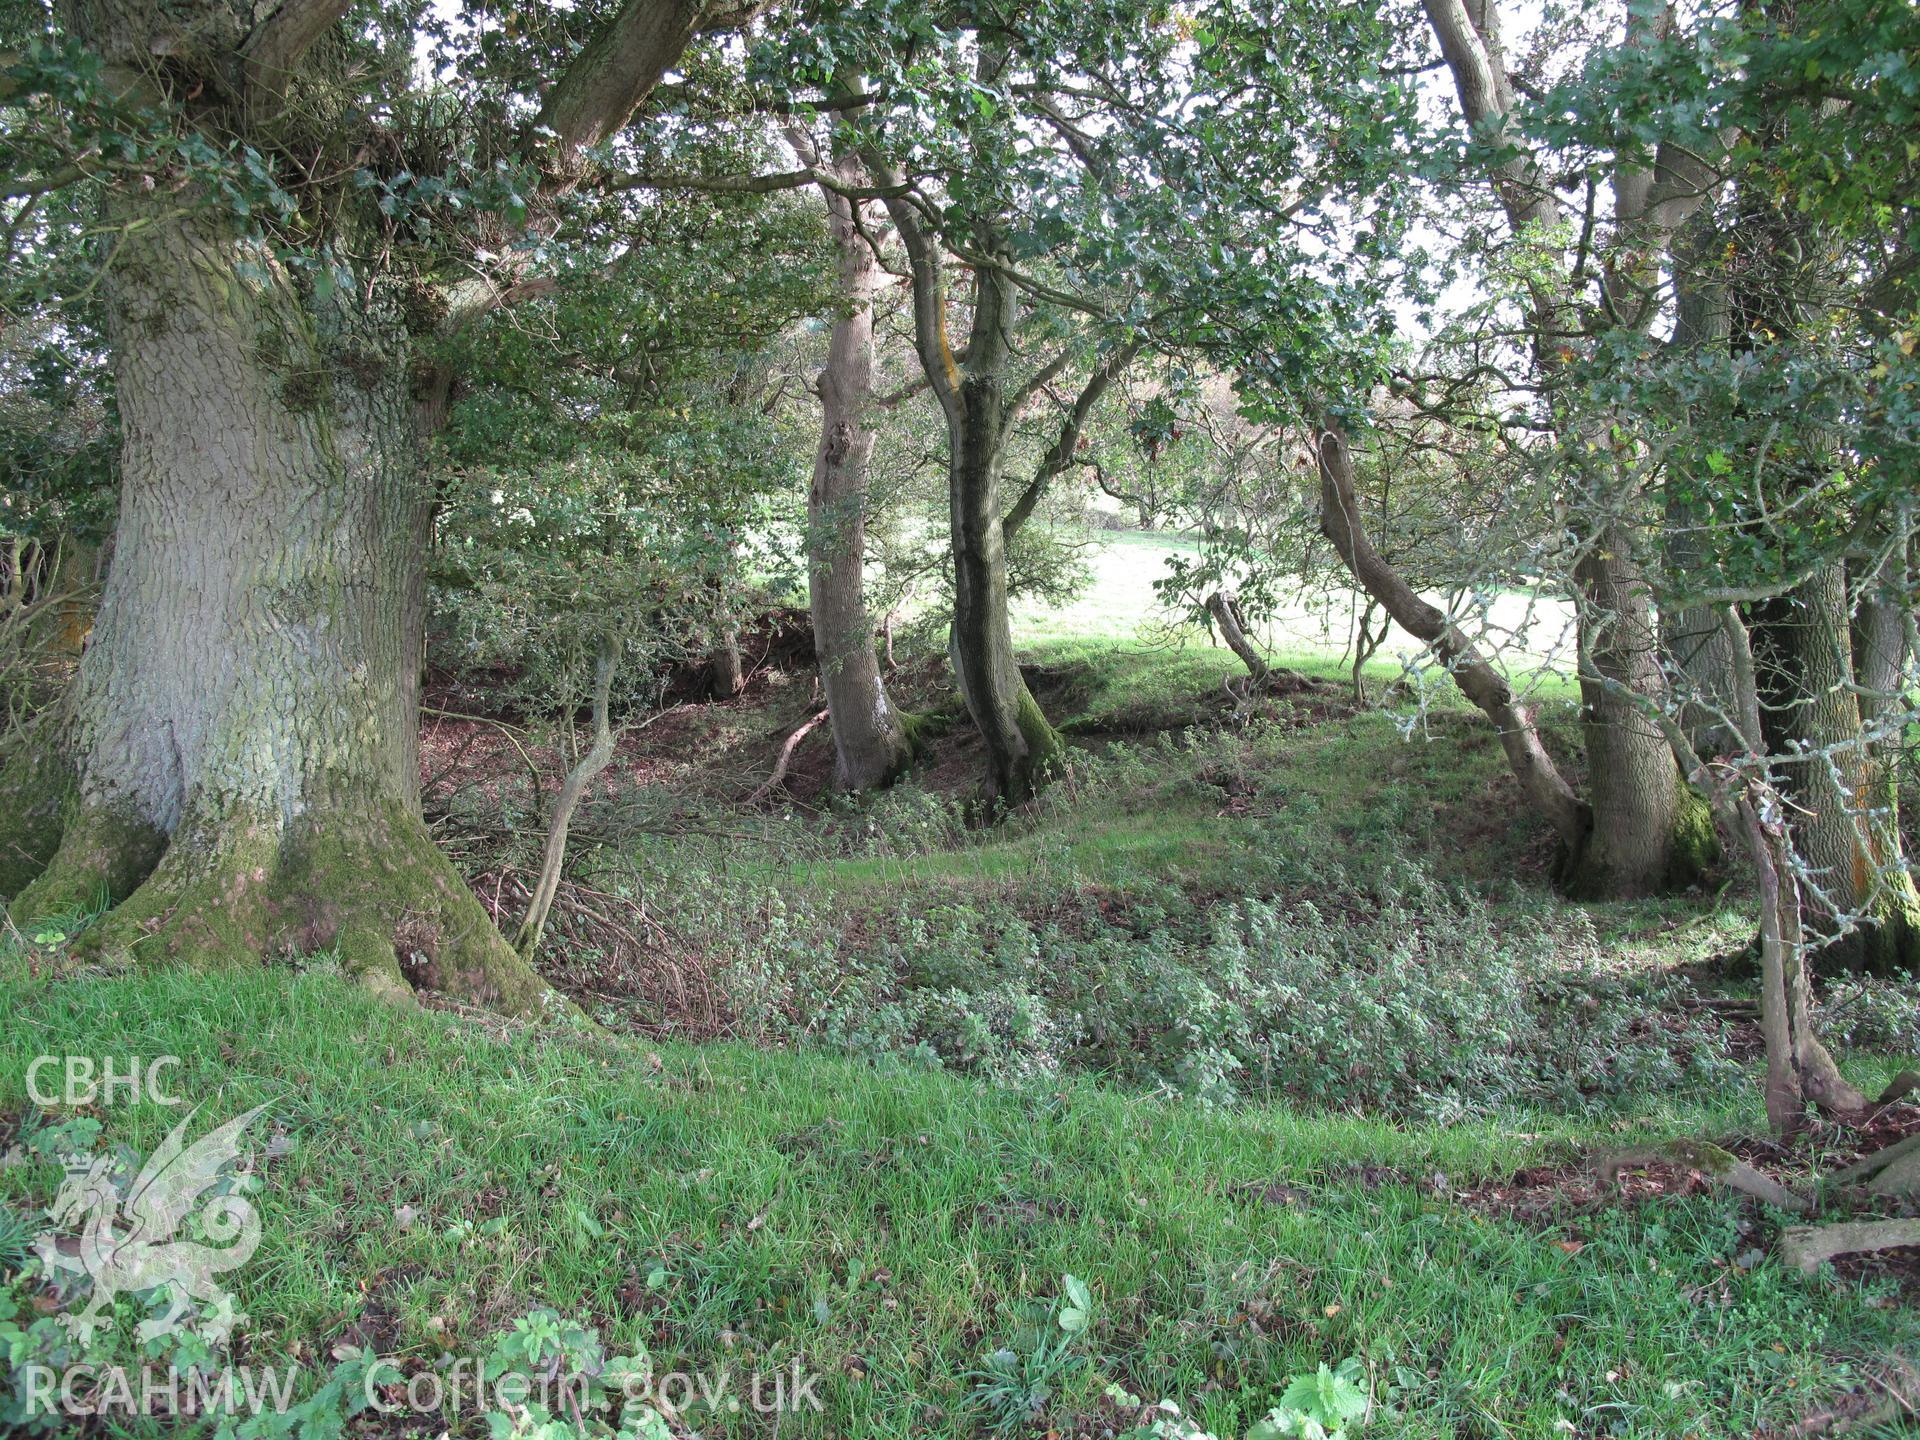 Quarry hollow at Craig-y-dorth from the northeast, taken by Brian Malaws on 26 September 2011.